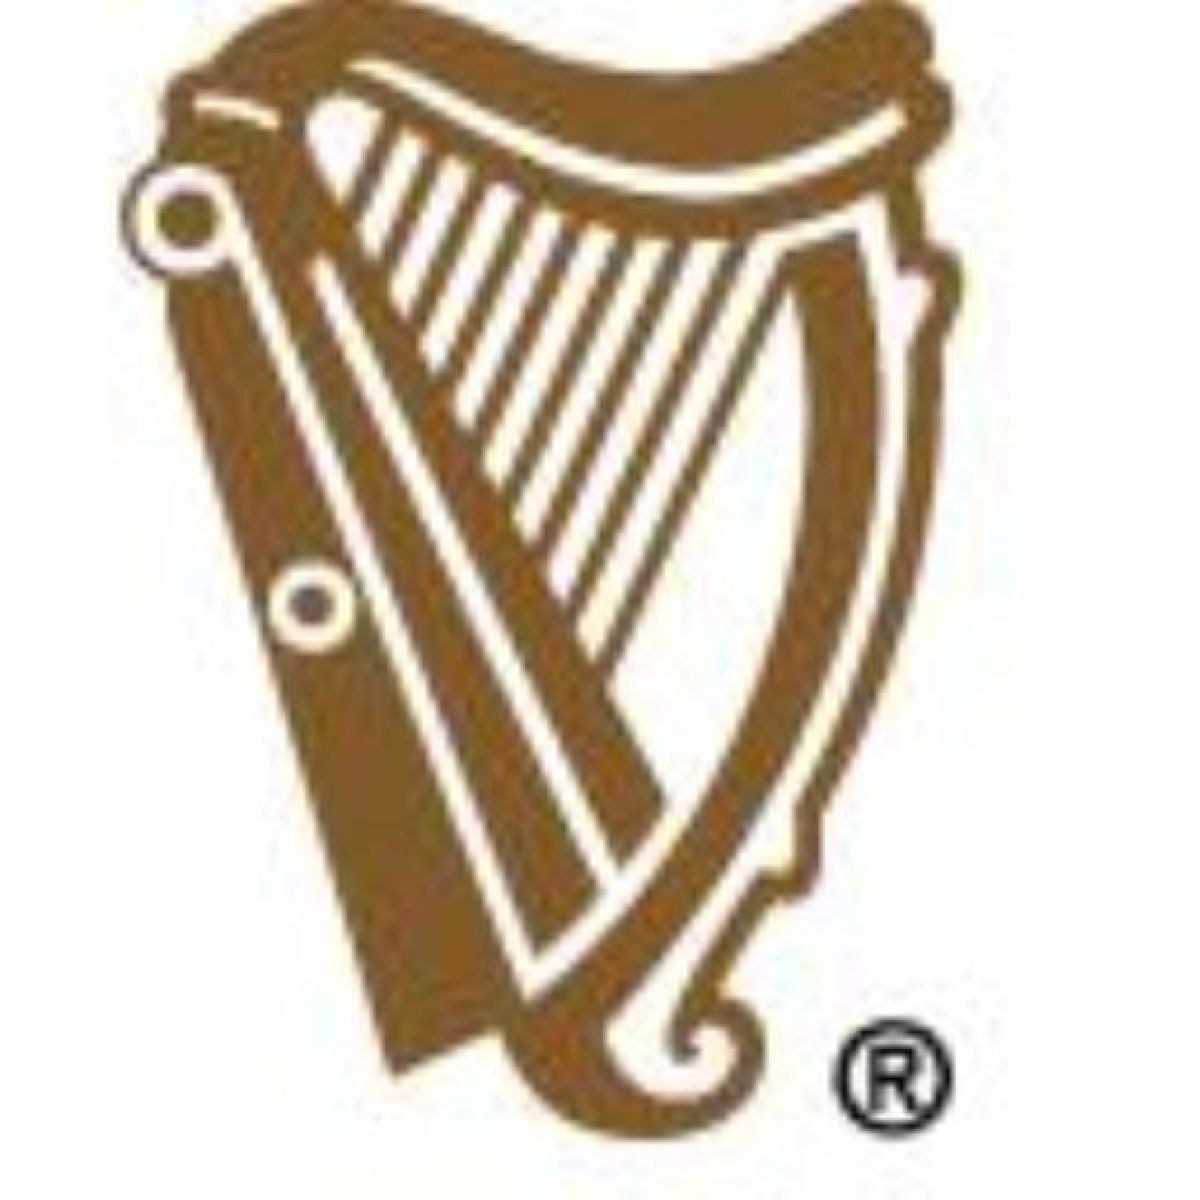 State feared Guinness objections over plan to make harp logo